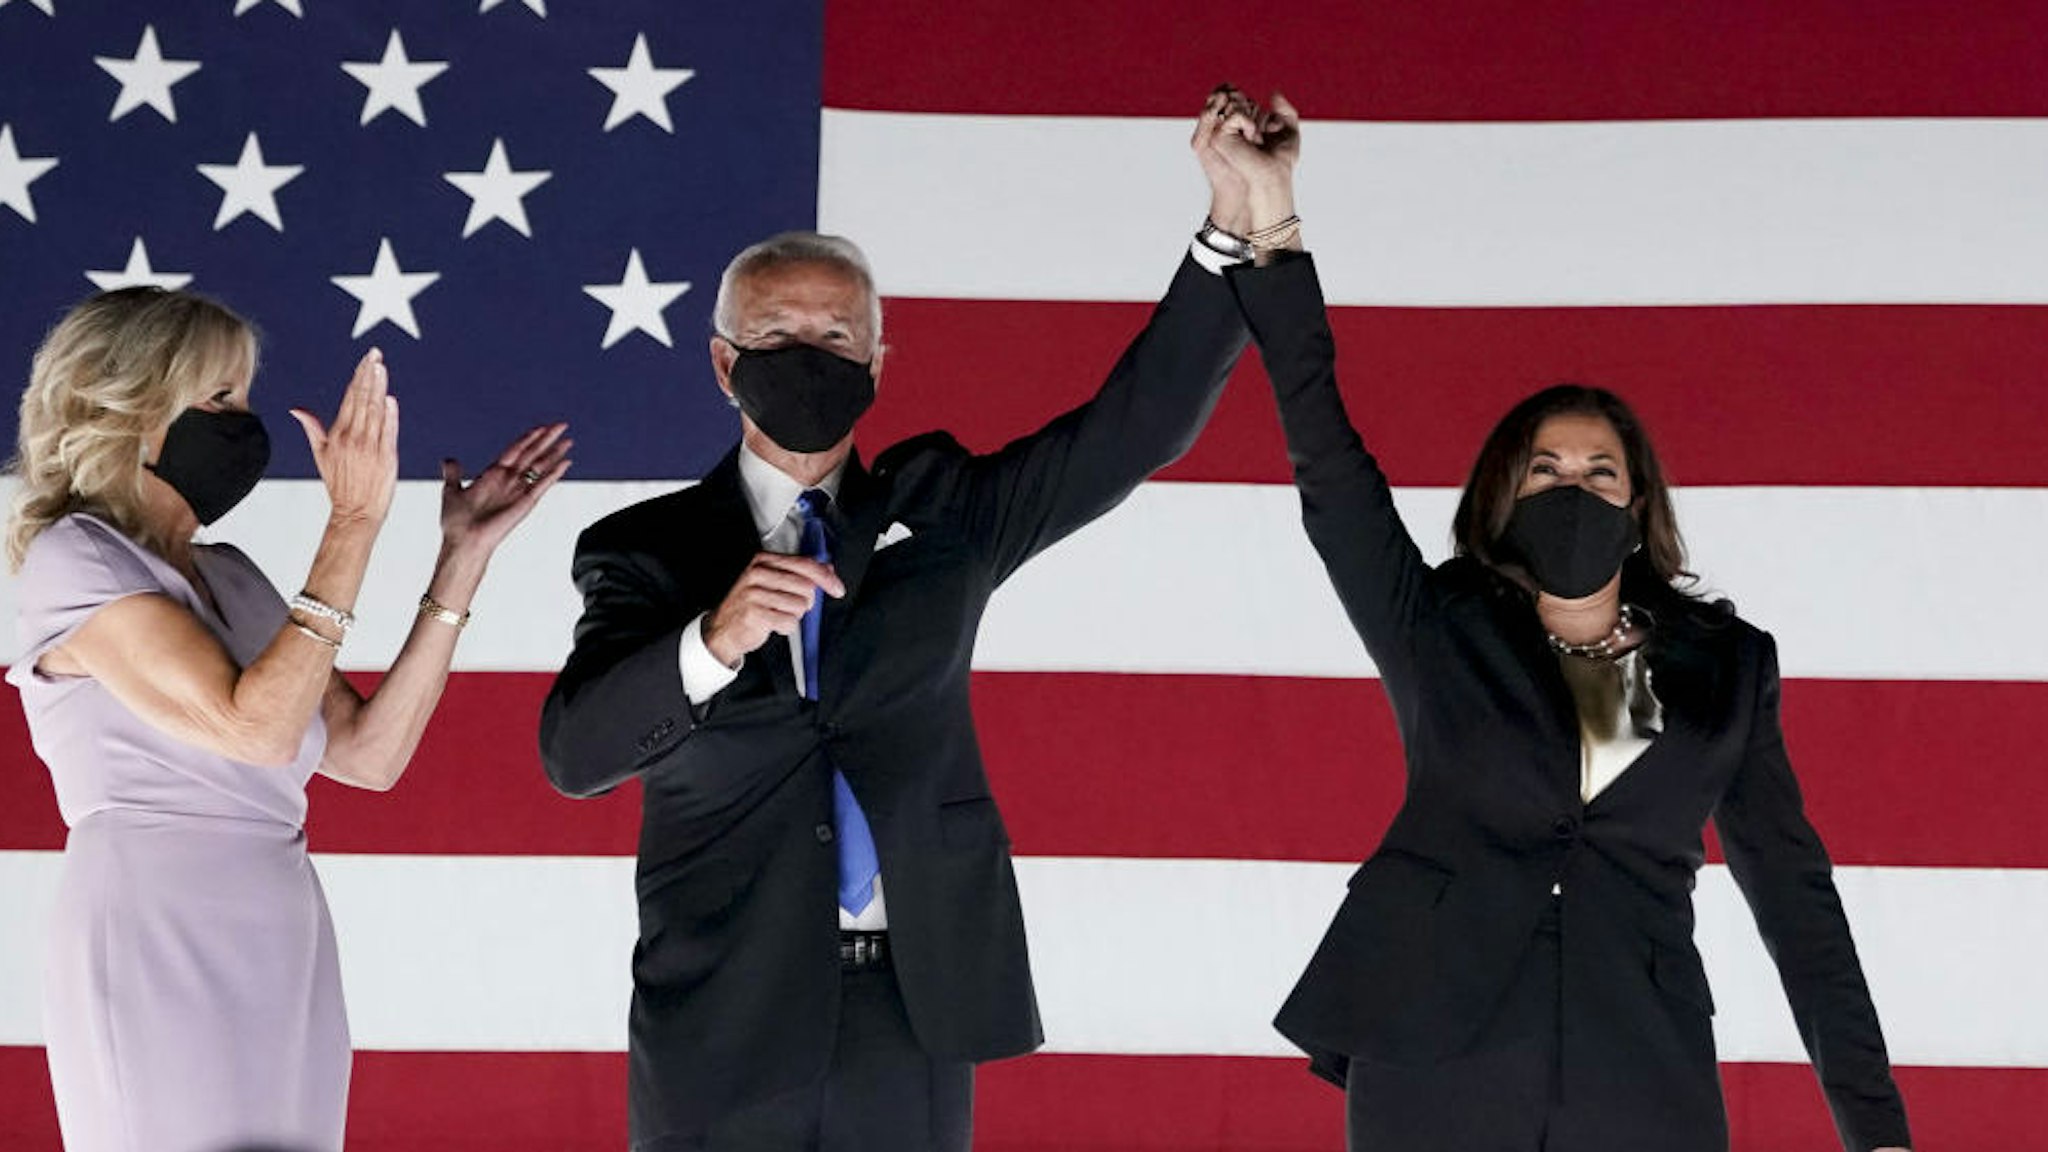 Former Vice President Joe Biden, Democratic presidential nominee, second left, and Senator Kamala Harris, Democratic vice presidential nominee, wear protective masks while holding hands next to Jill Biden, left, outside the Chase Center during the Democratic National Convention in Wilmington, Delaware, U.S., on Thursday, Aug. 20, 2020. Biden accepted the Democratic nomination to challenge President Donald Trump, urging Americans in a prime-time address to vote for new national leadership that will overcome deep U.S. political divisions. Photographer: Stefani Reynolds/Bloomberg